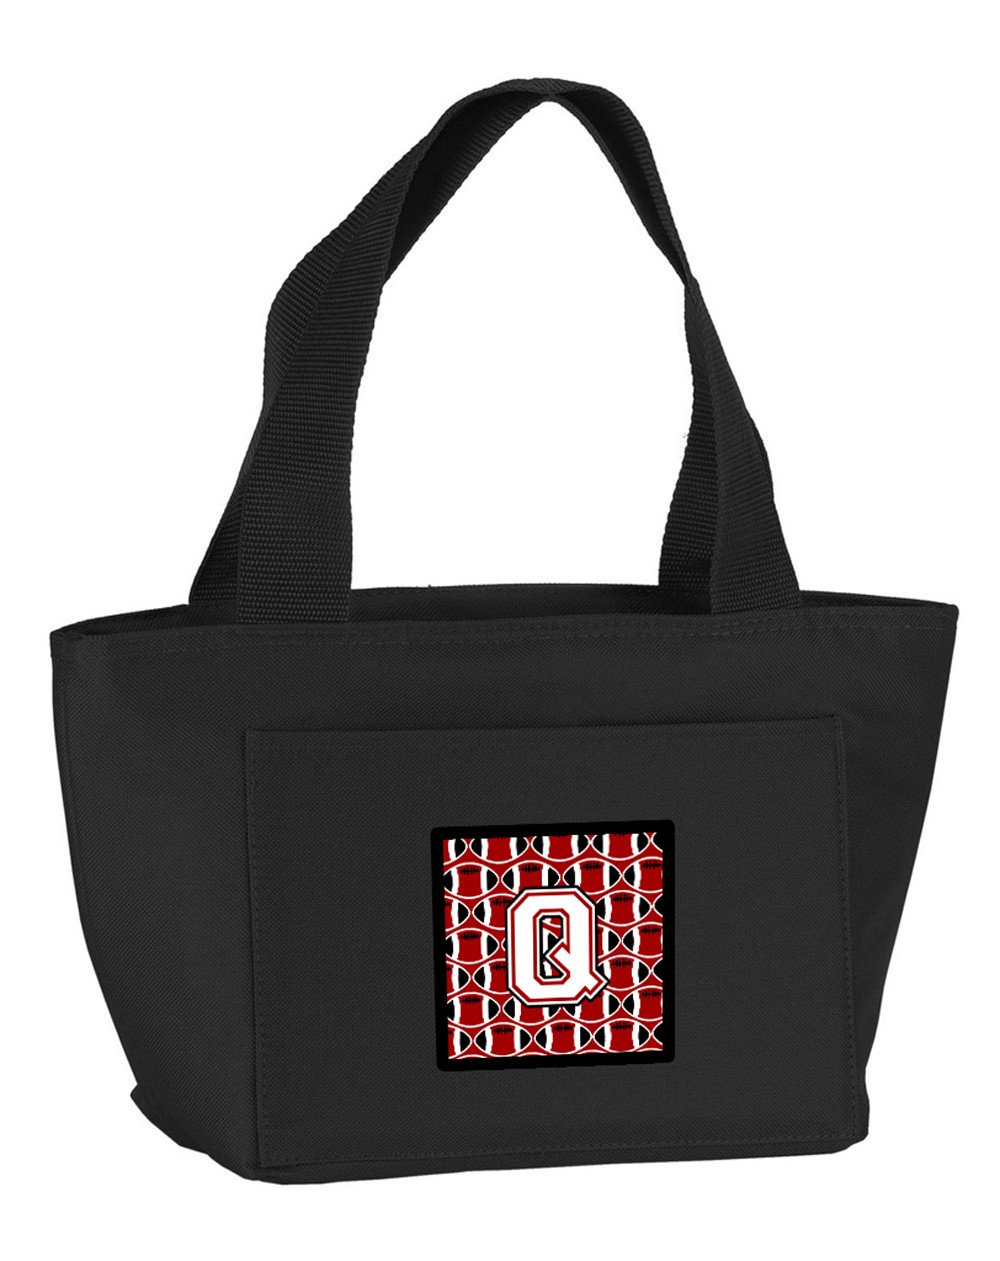 Letter Q Football Cardinal and White Lunch Bag CJ1082-QBK-8808 by Caroline's Treasures